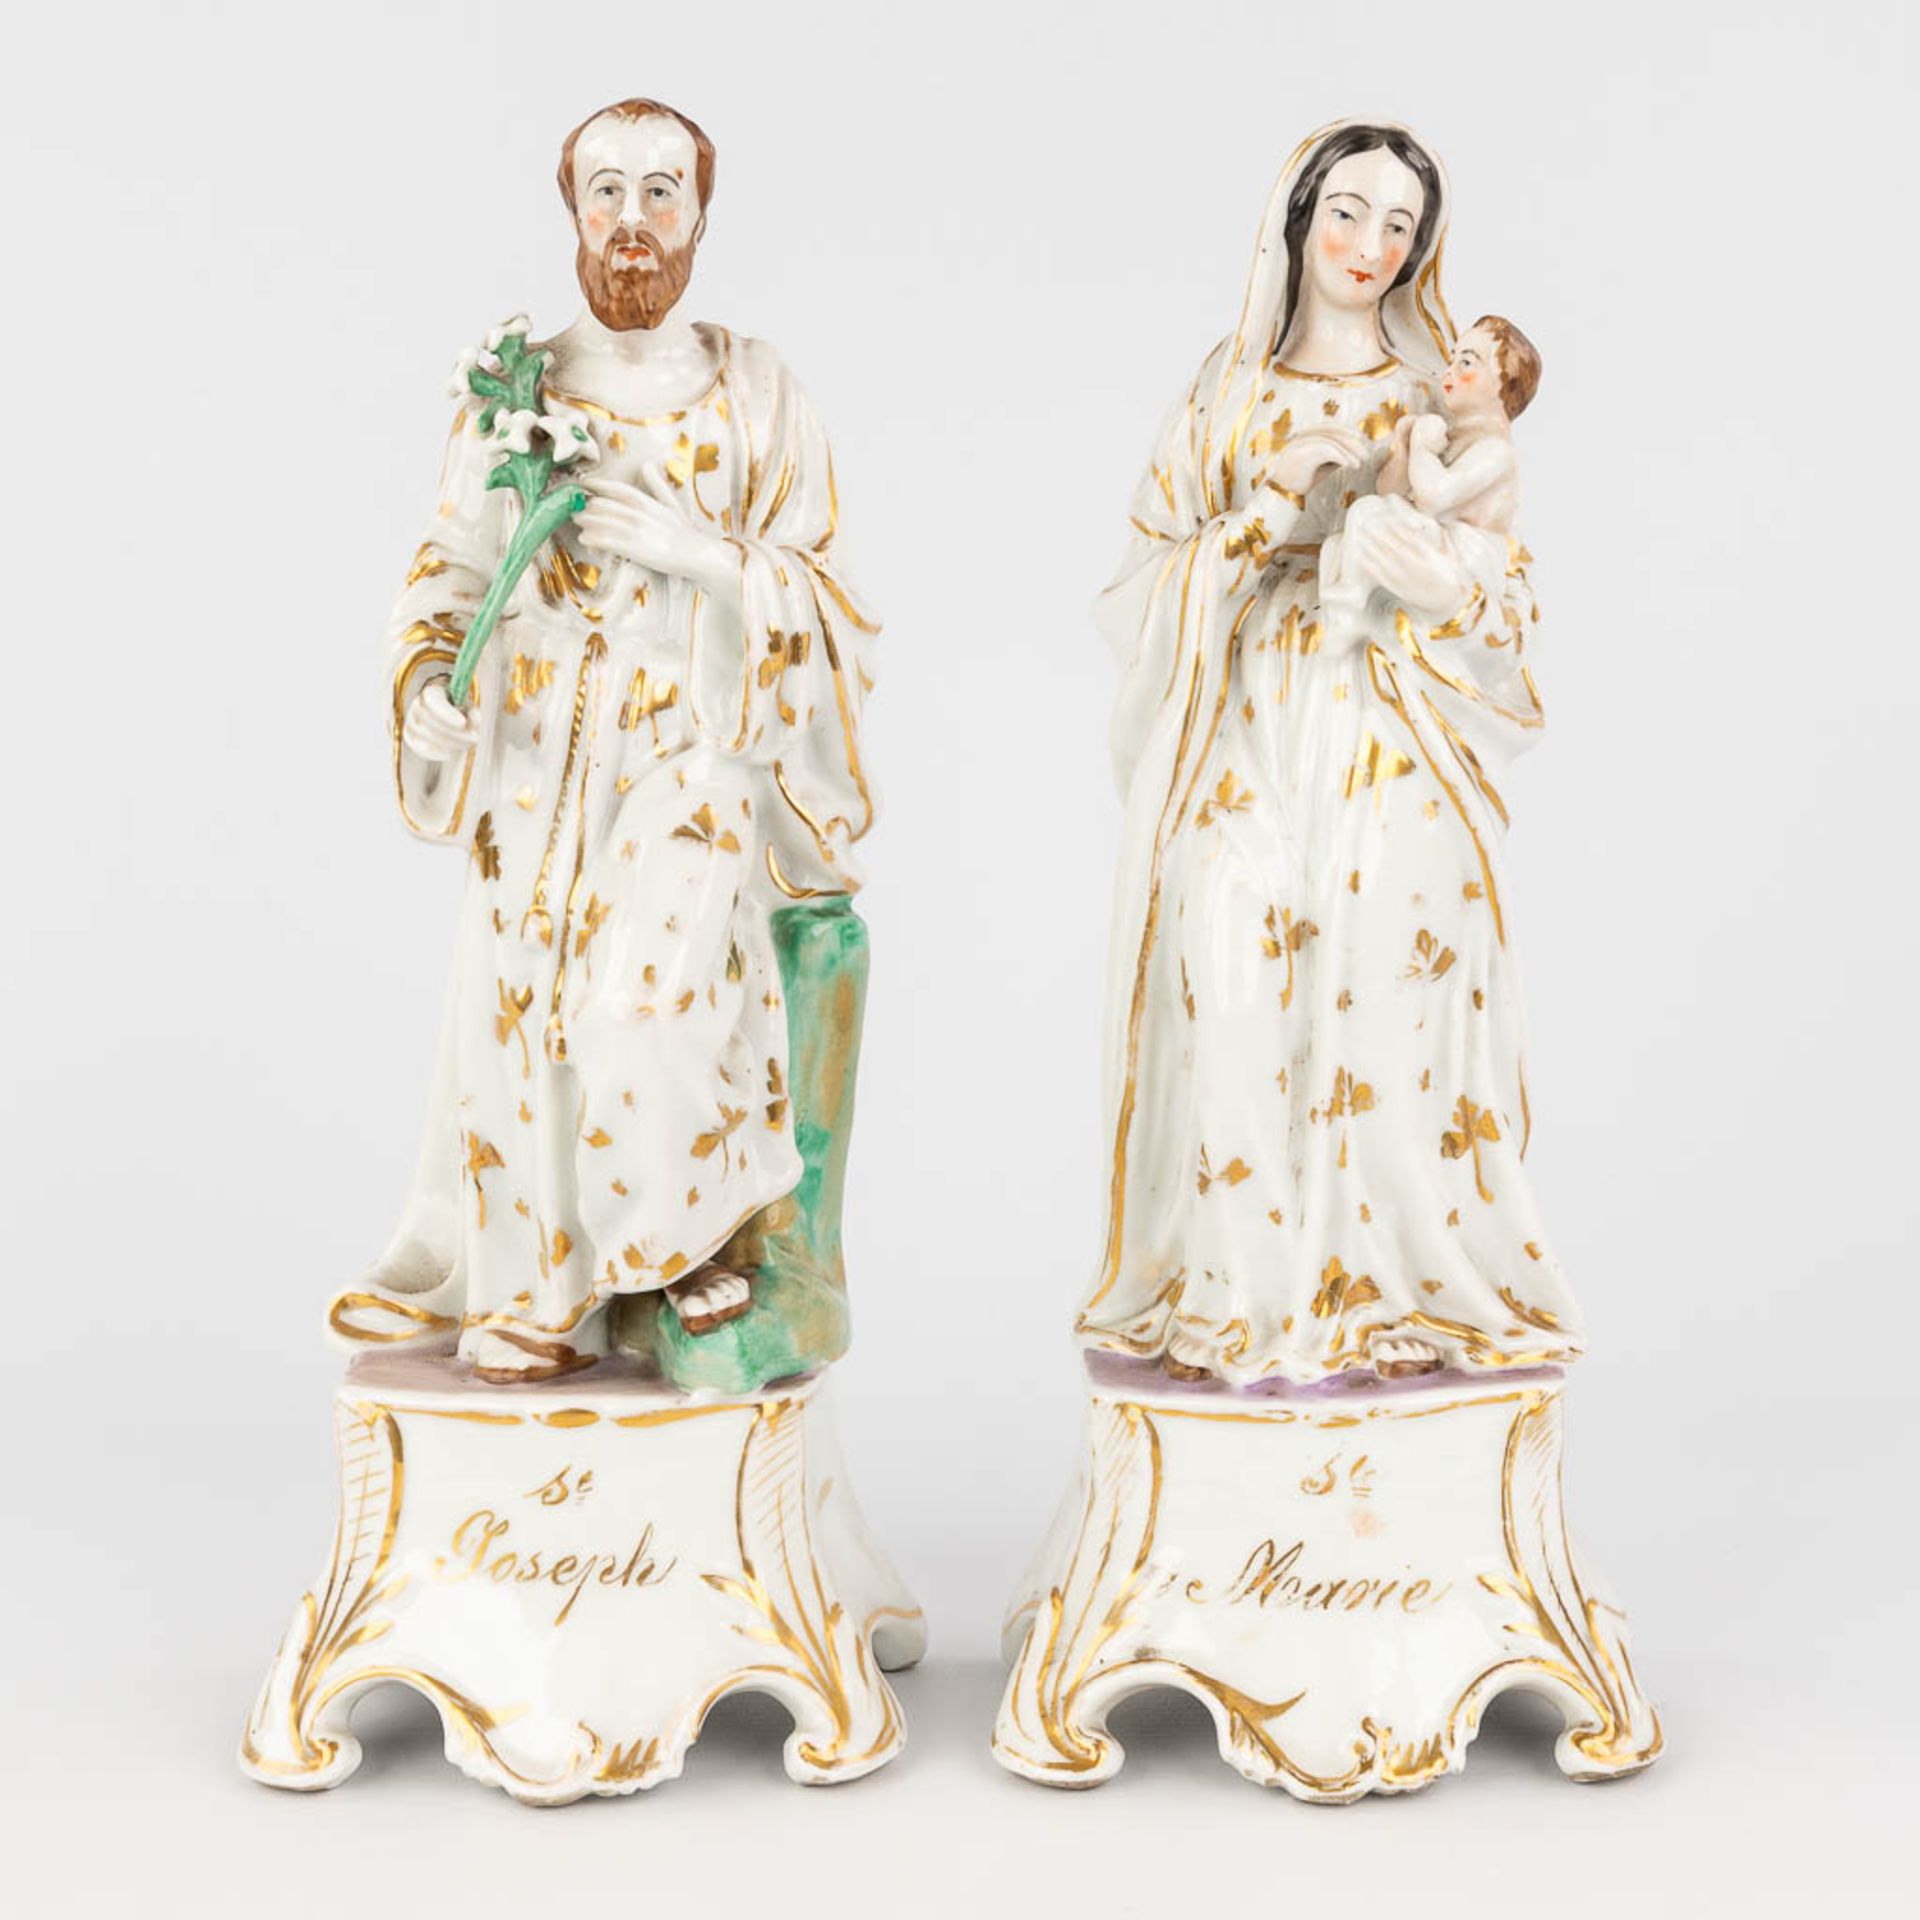 A porcelain figurine of Mary and Joseph, made in Andenne, Belgium. (H: 32 cm) - Image 3 of 13